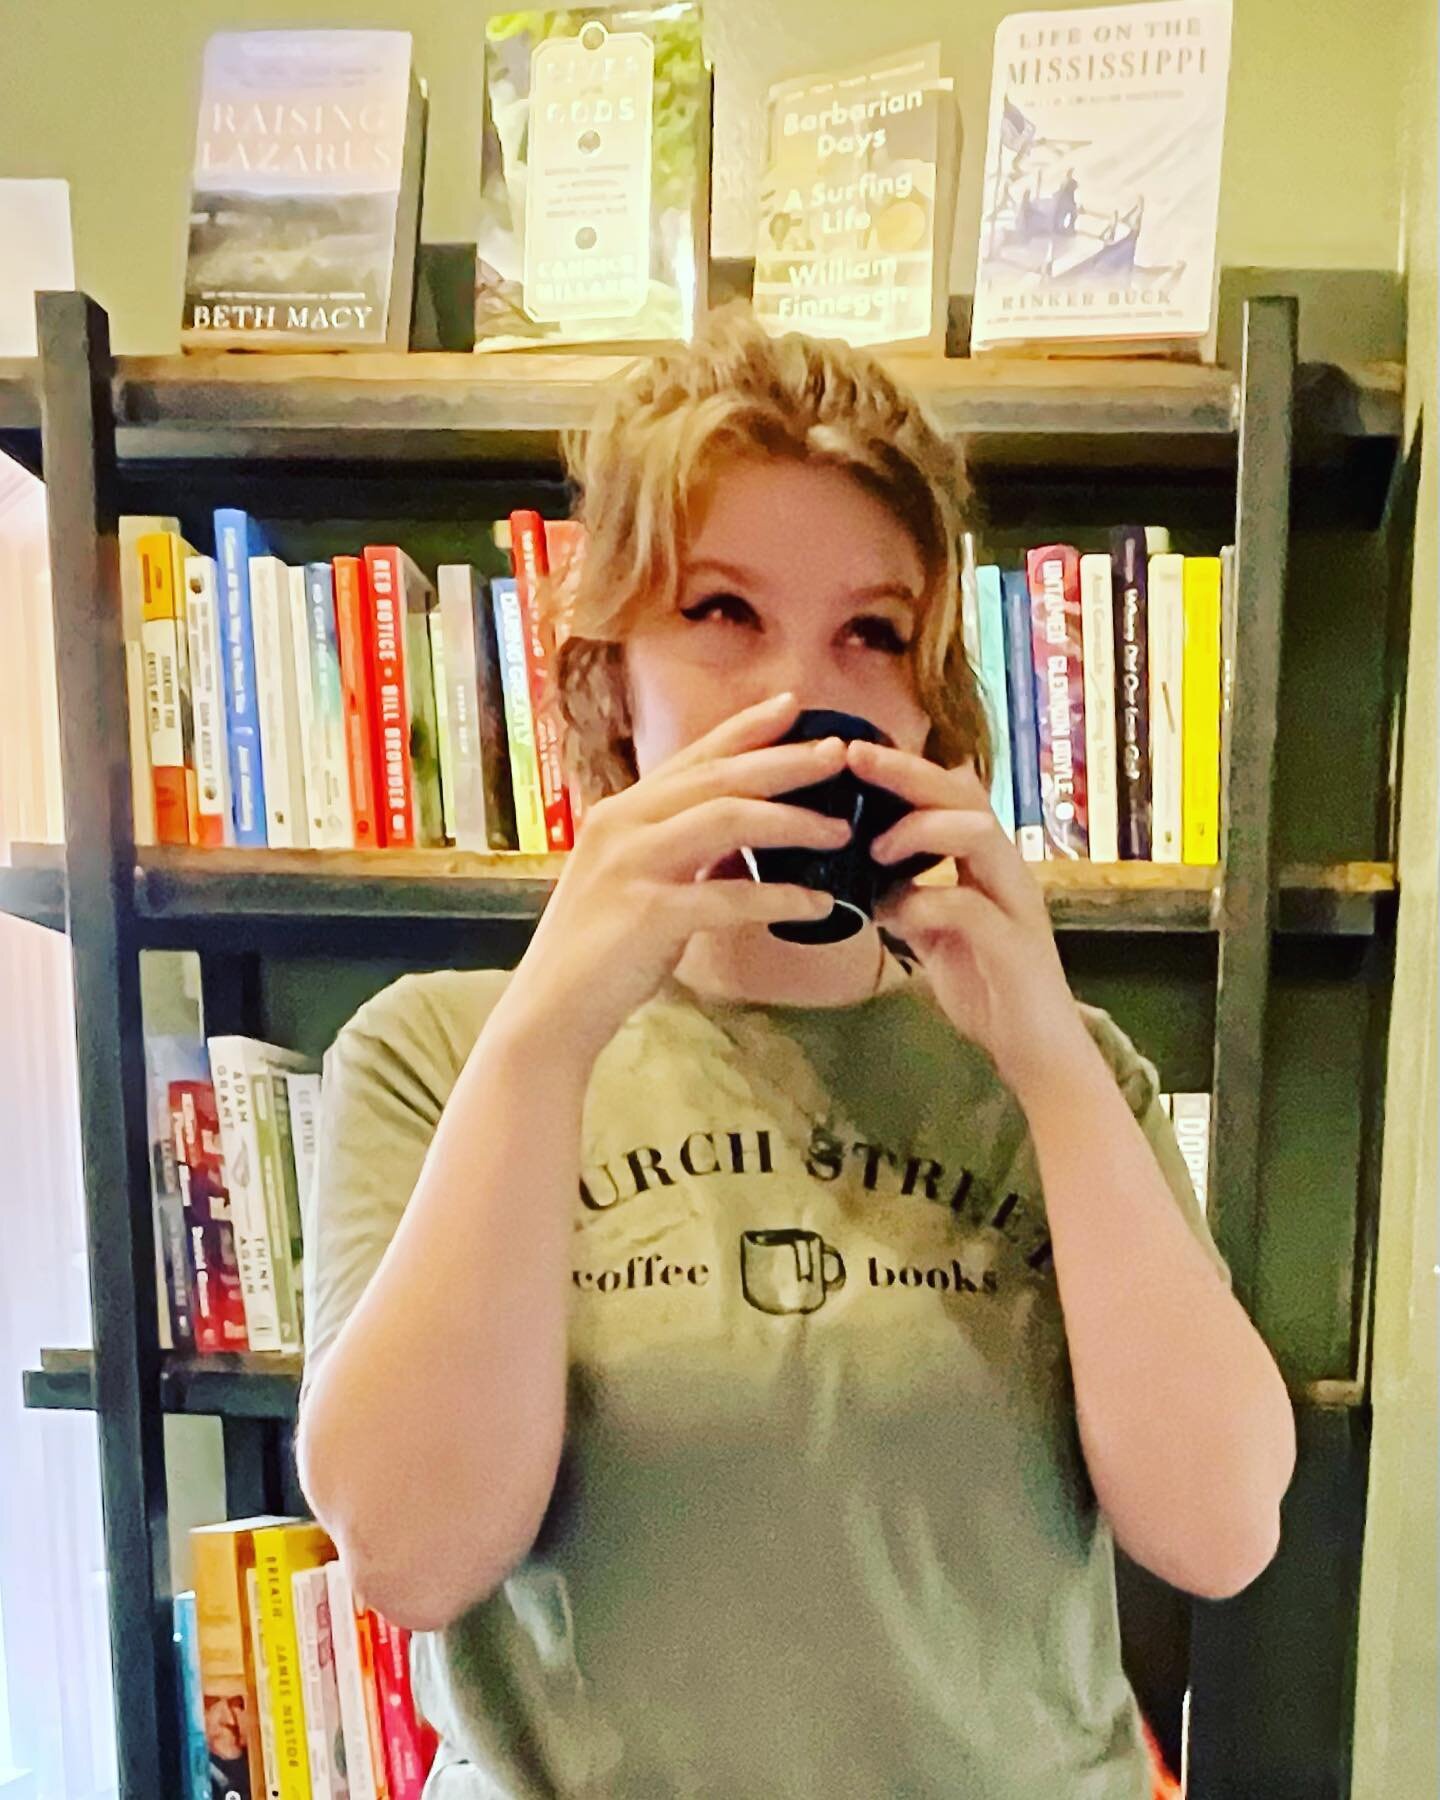 Our T-Shirts are back!

$25-$30 plus tax

We&rsquo;re open daily from 6am-6pm. Come see us!

ID: @liz.joy.beaumont wearing t-shirts at @81churchstreet 

#churchstreetcoffee #churchstreetcoffeeandbooks #coffeeandbooks #thebreakupcookie #bhameats #moun